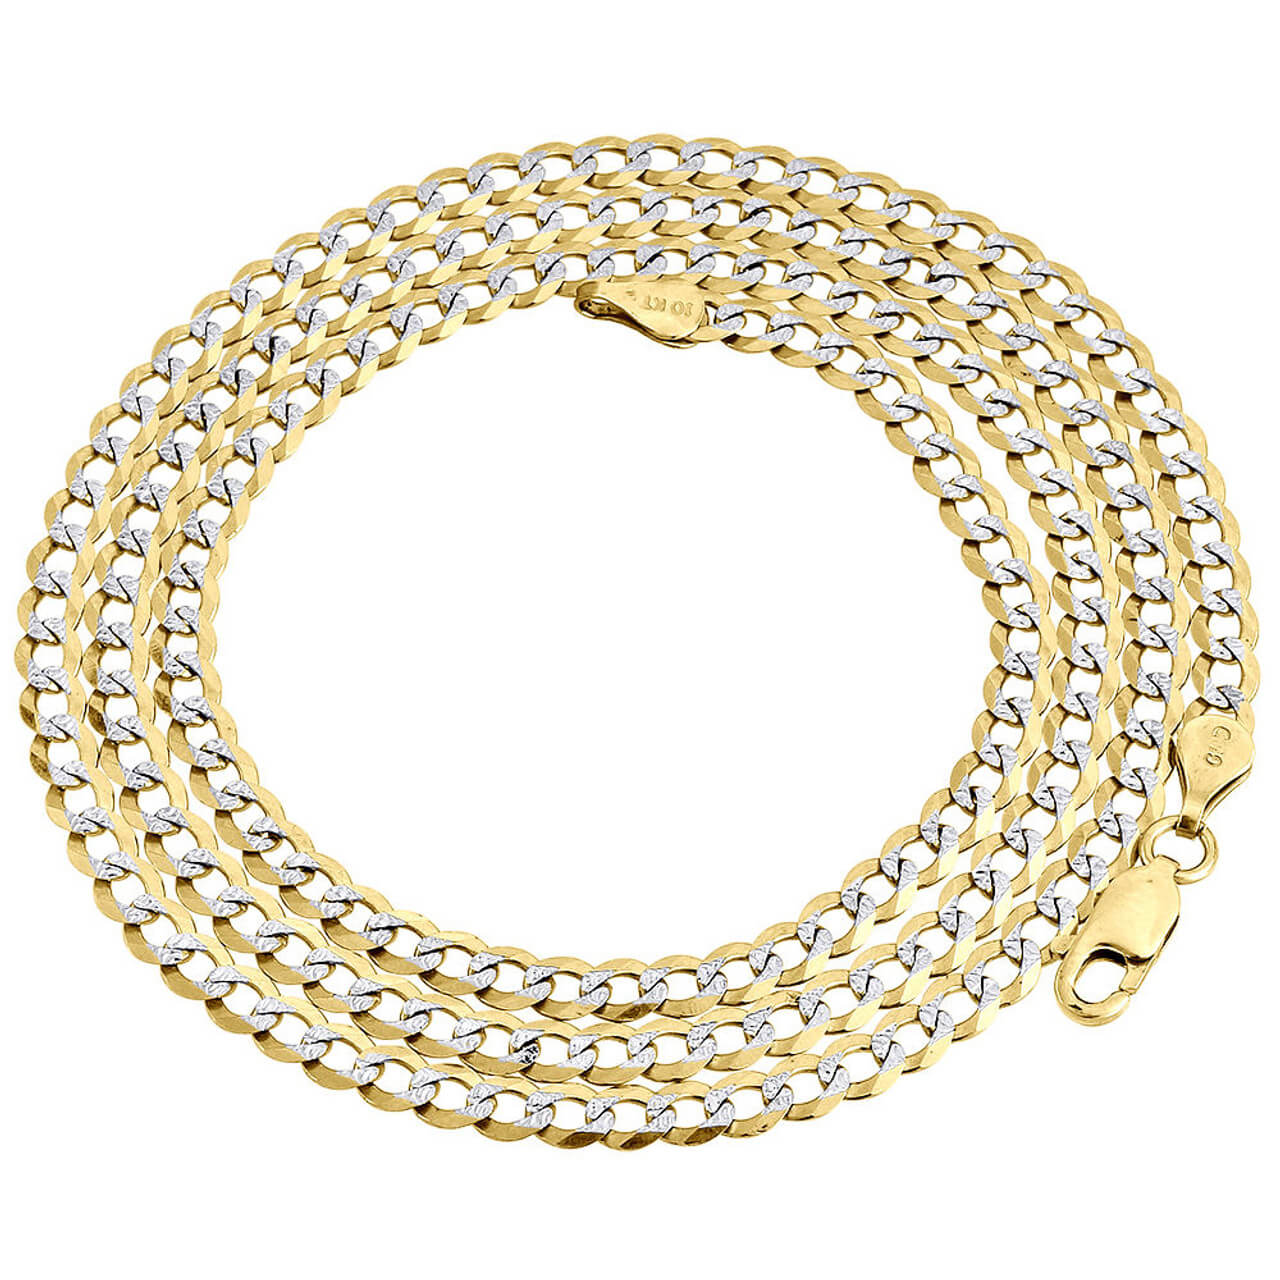 Real 10K Yellow Gold 3.5MM Solid Pave Style Cuban Link Chain Necklace 16-30"